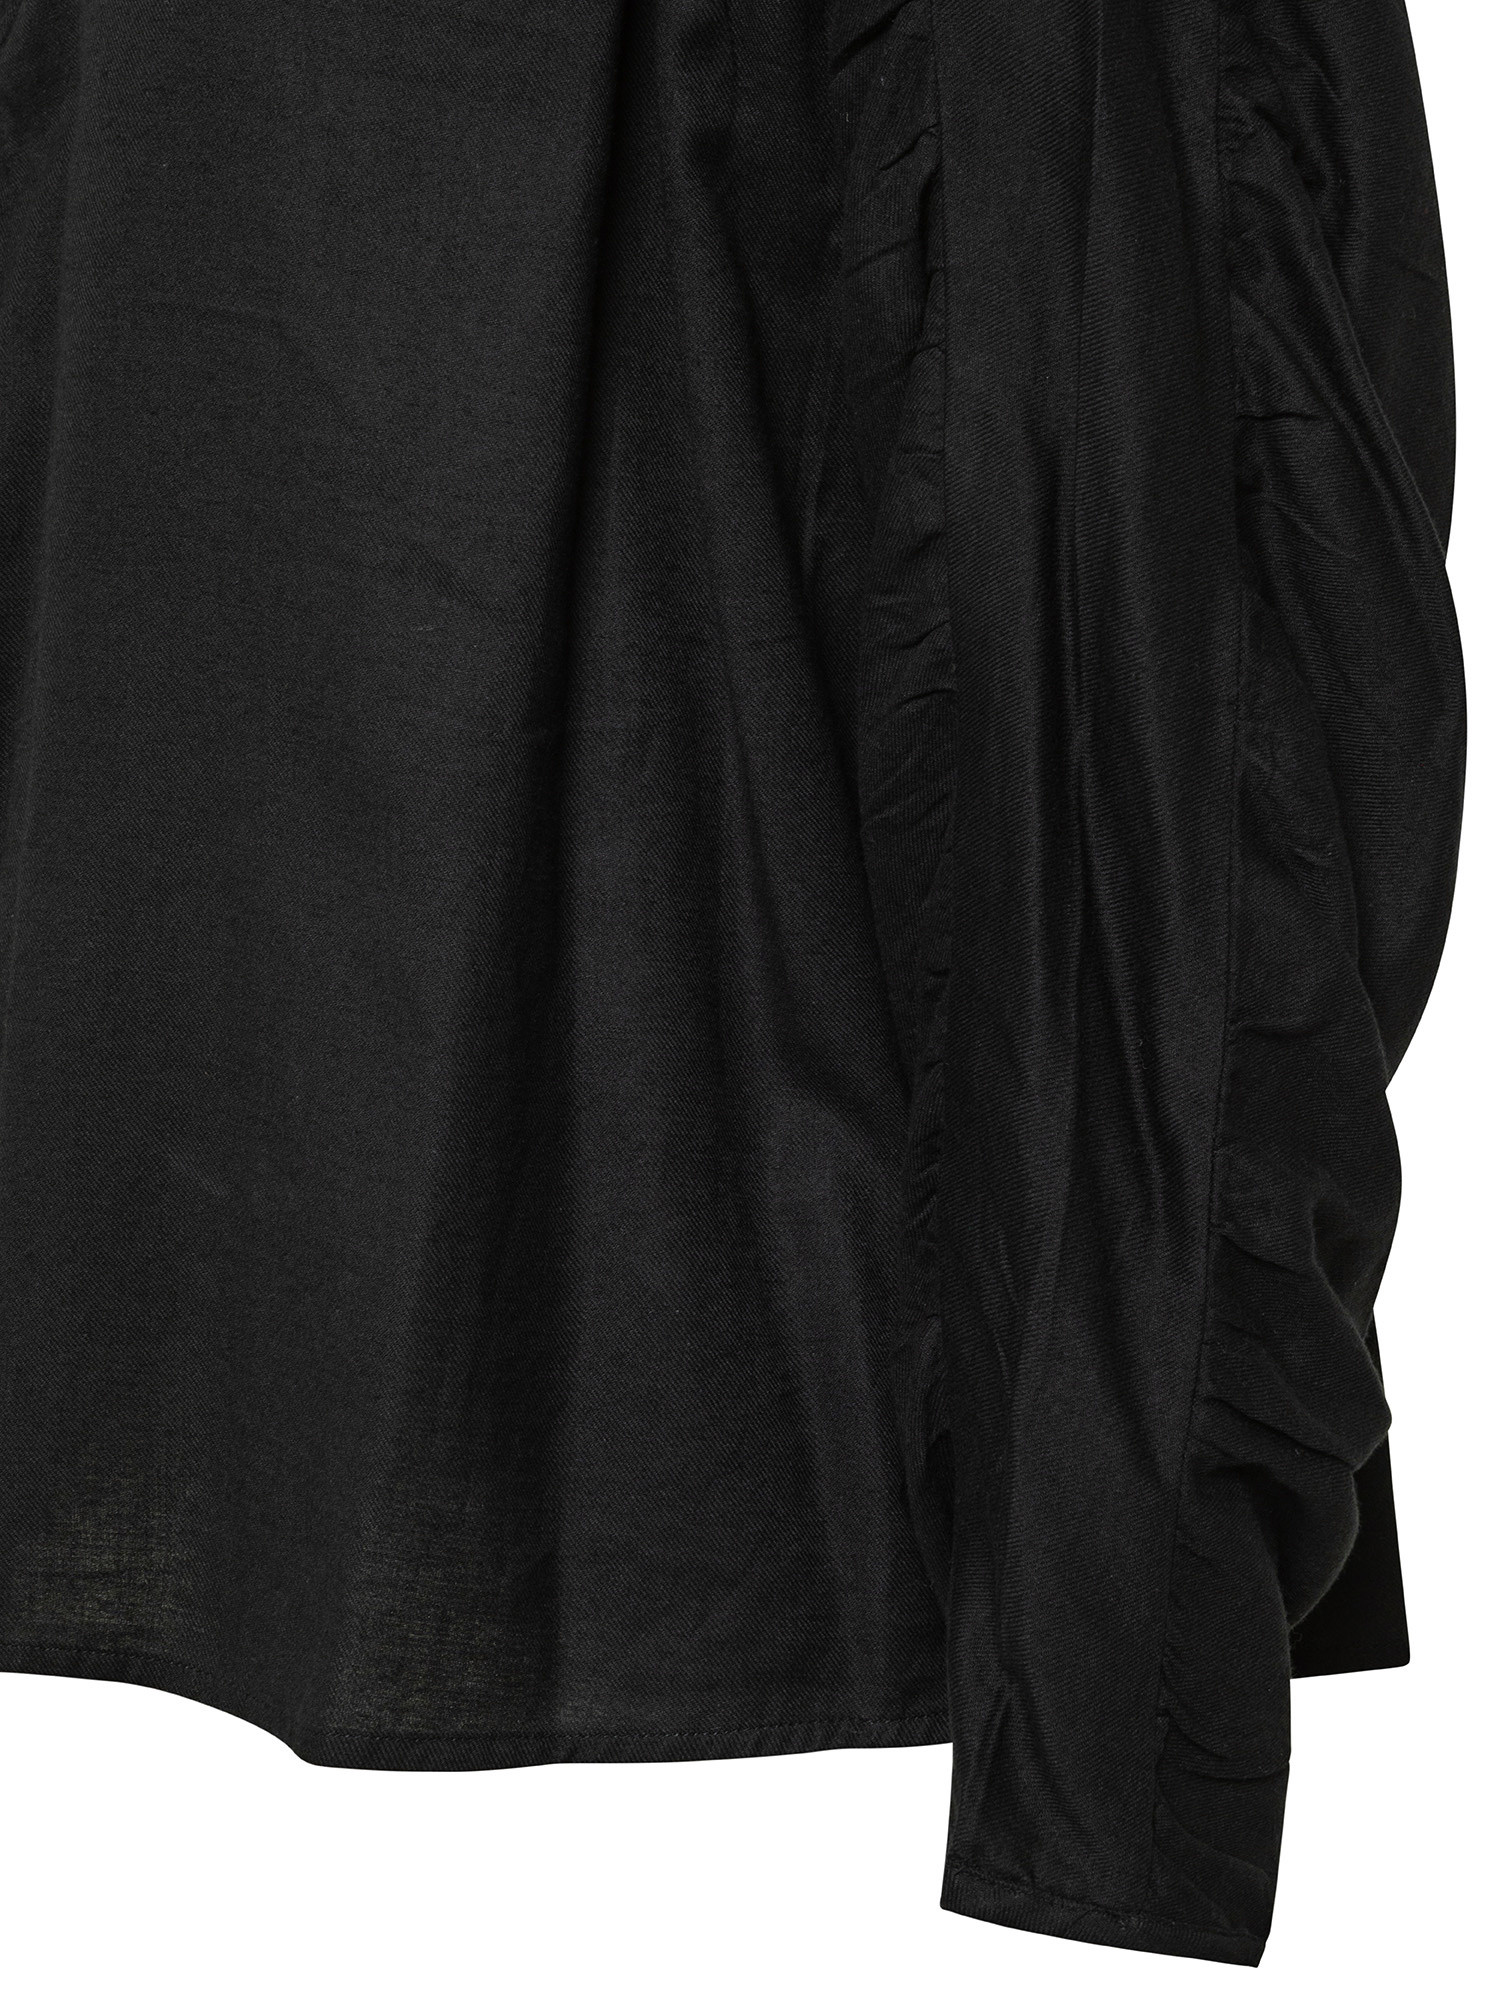 Blouse in cotton with long sleeves, Black, large image number 2